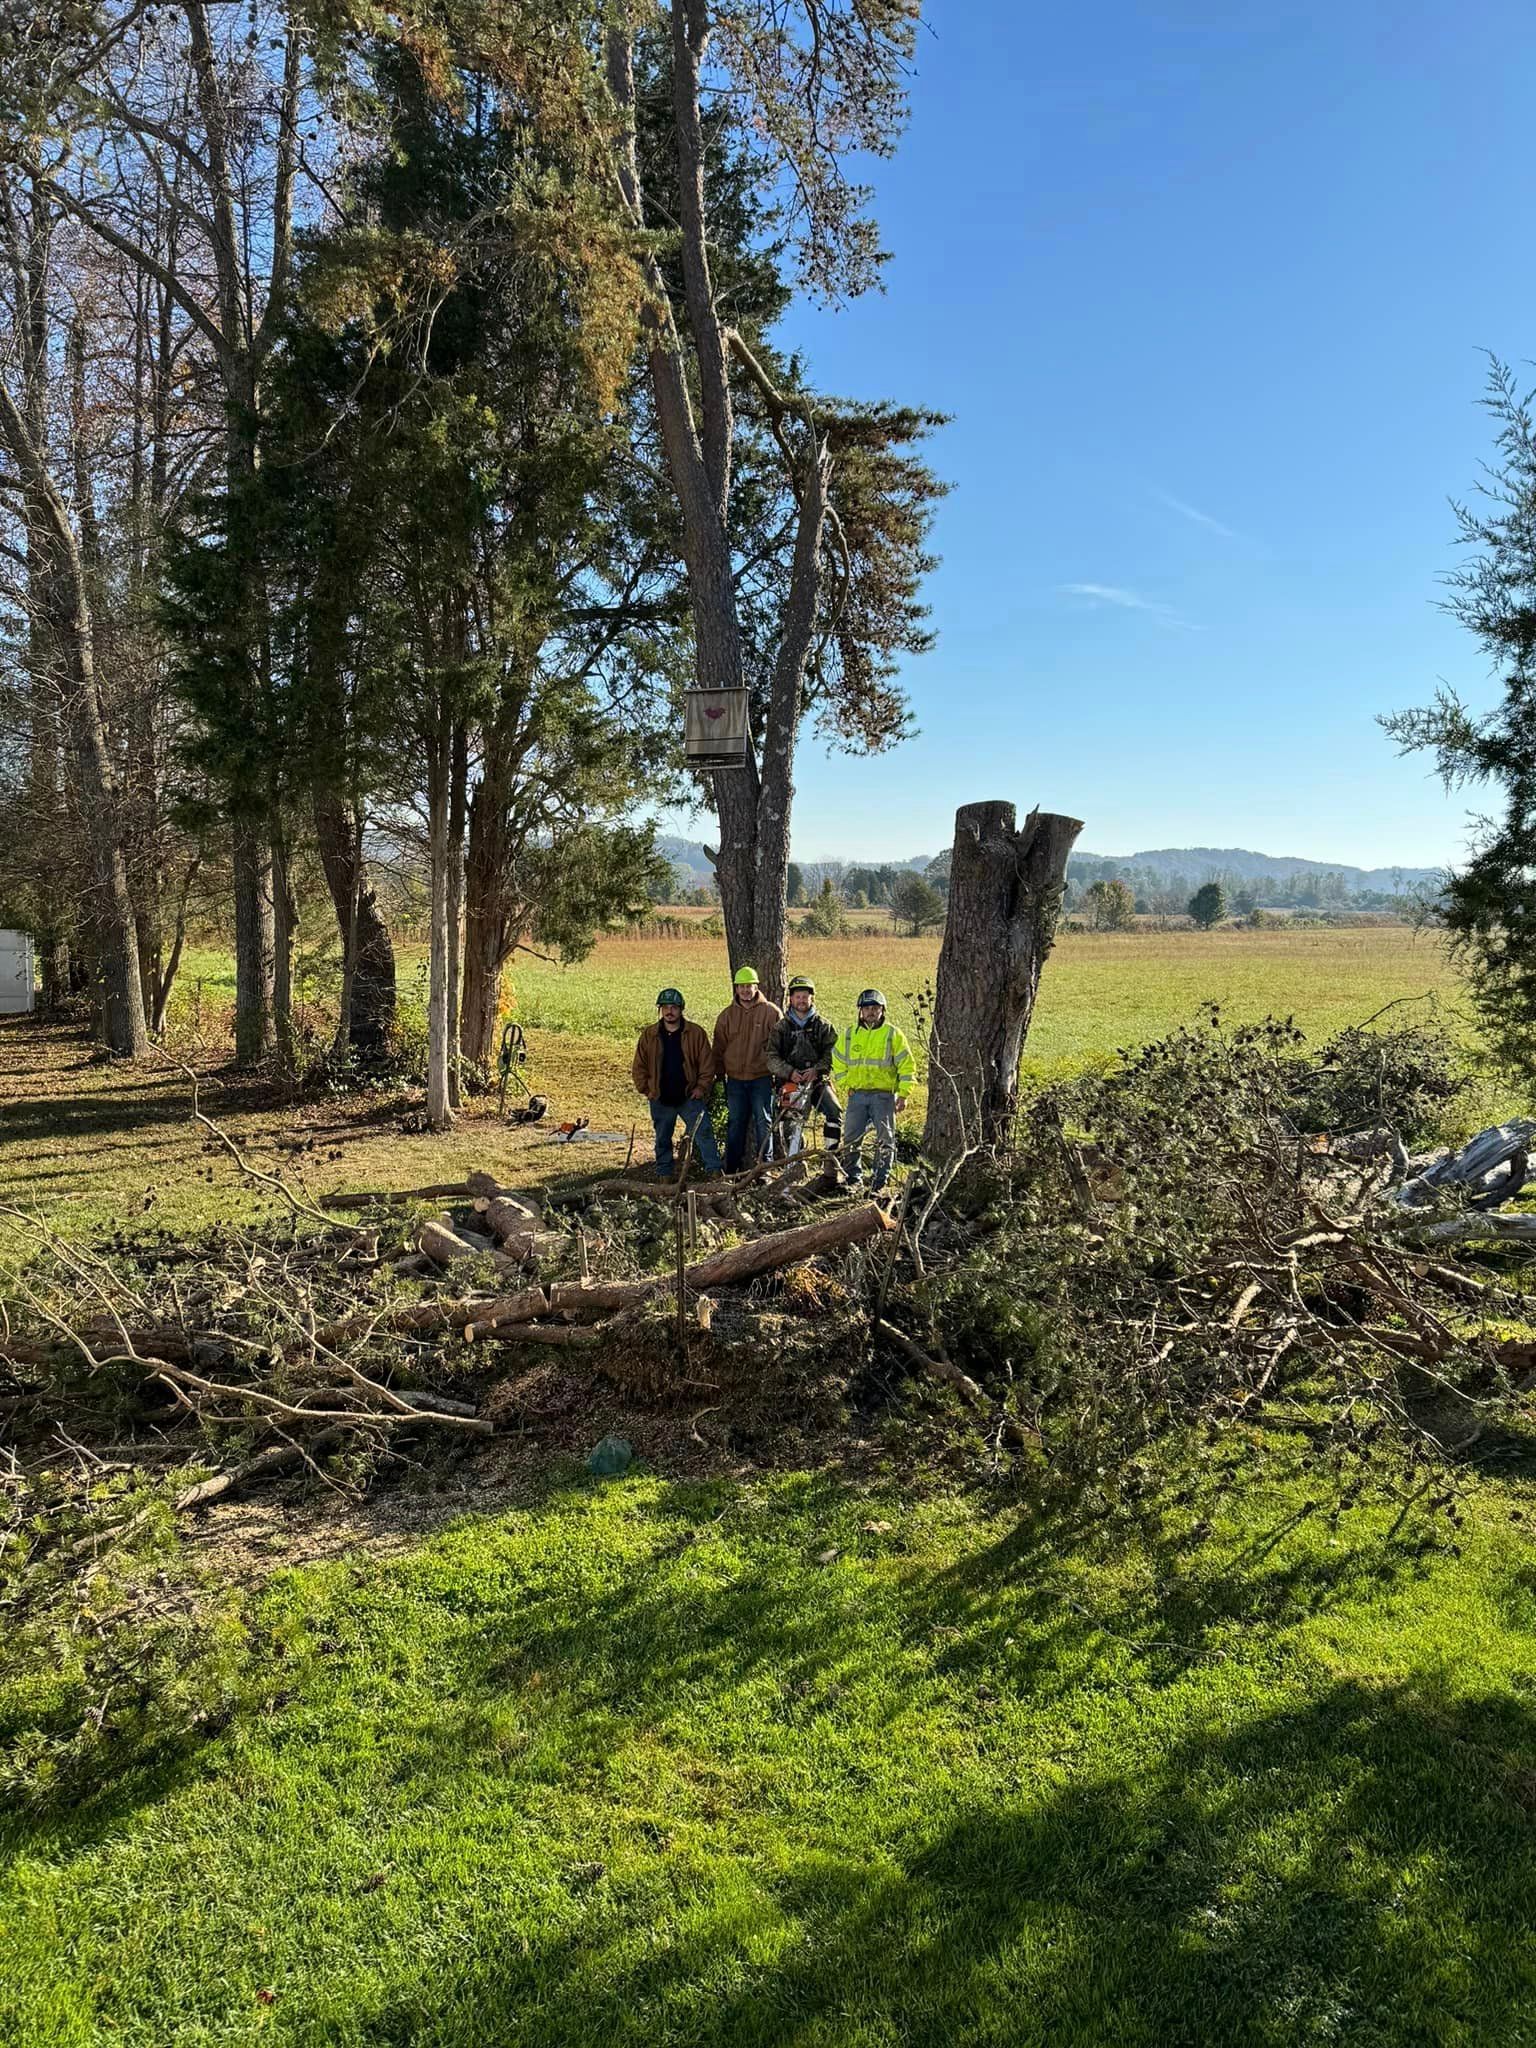 A Group of People Are Standing in a Field Next to a Fallen Tree | Putnam County, WV | Jones Empire Tree Service